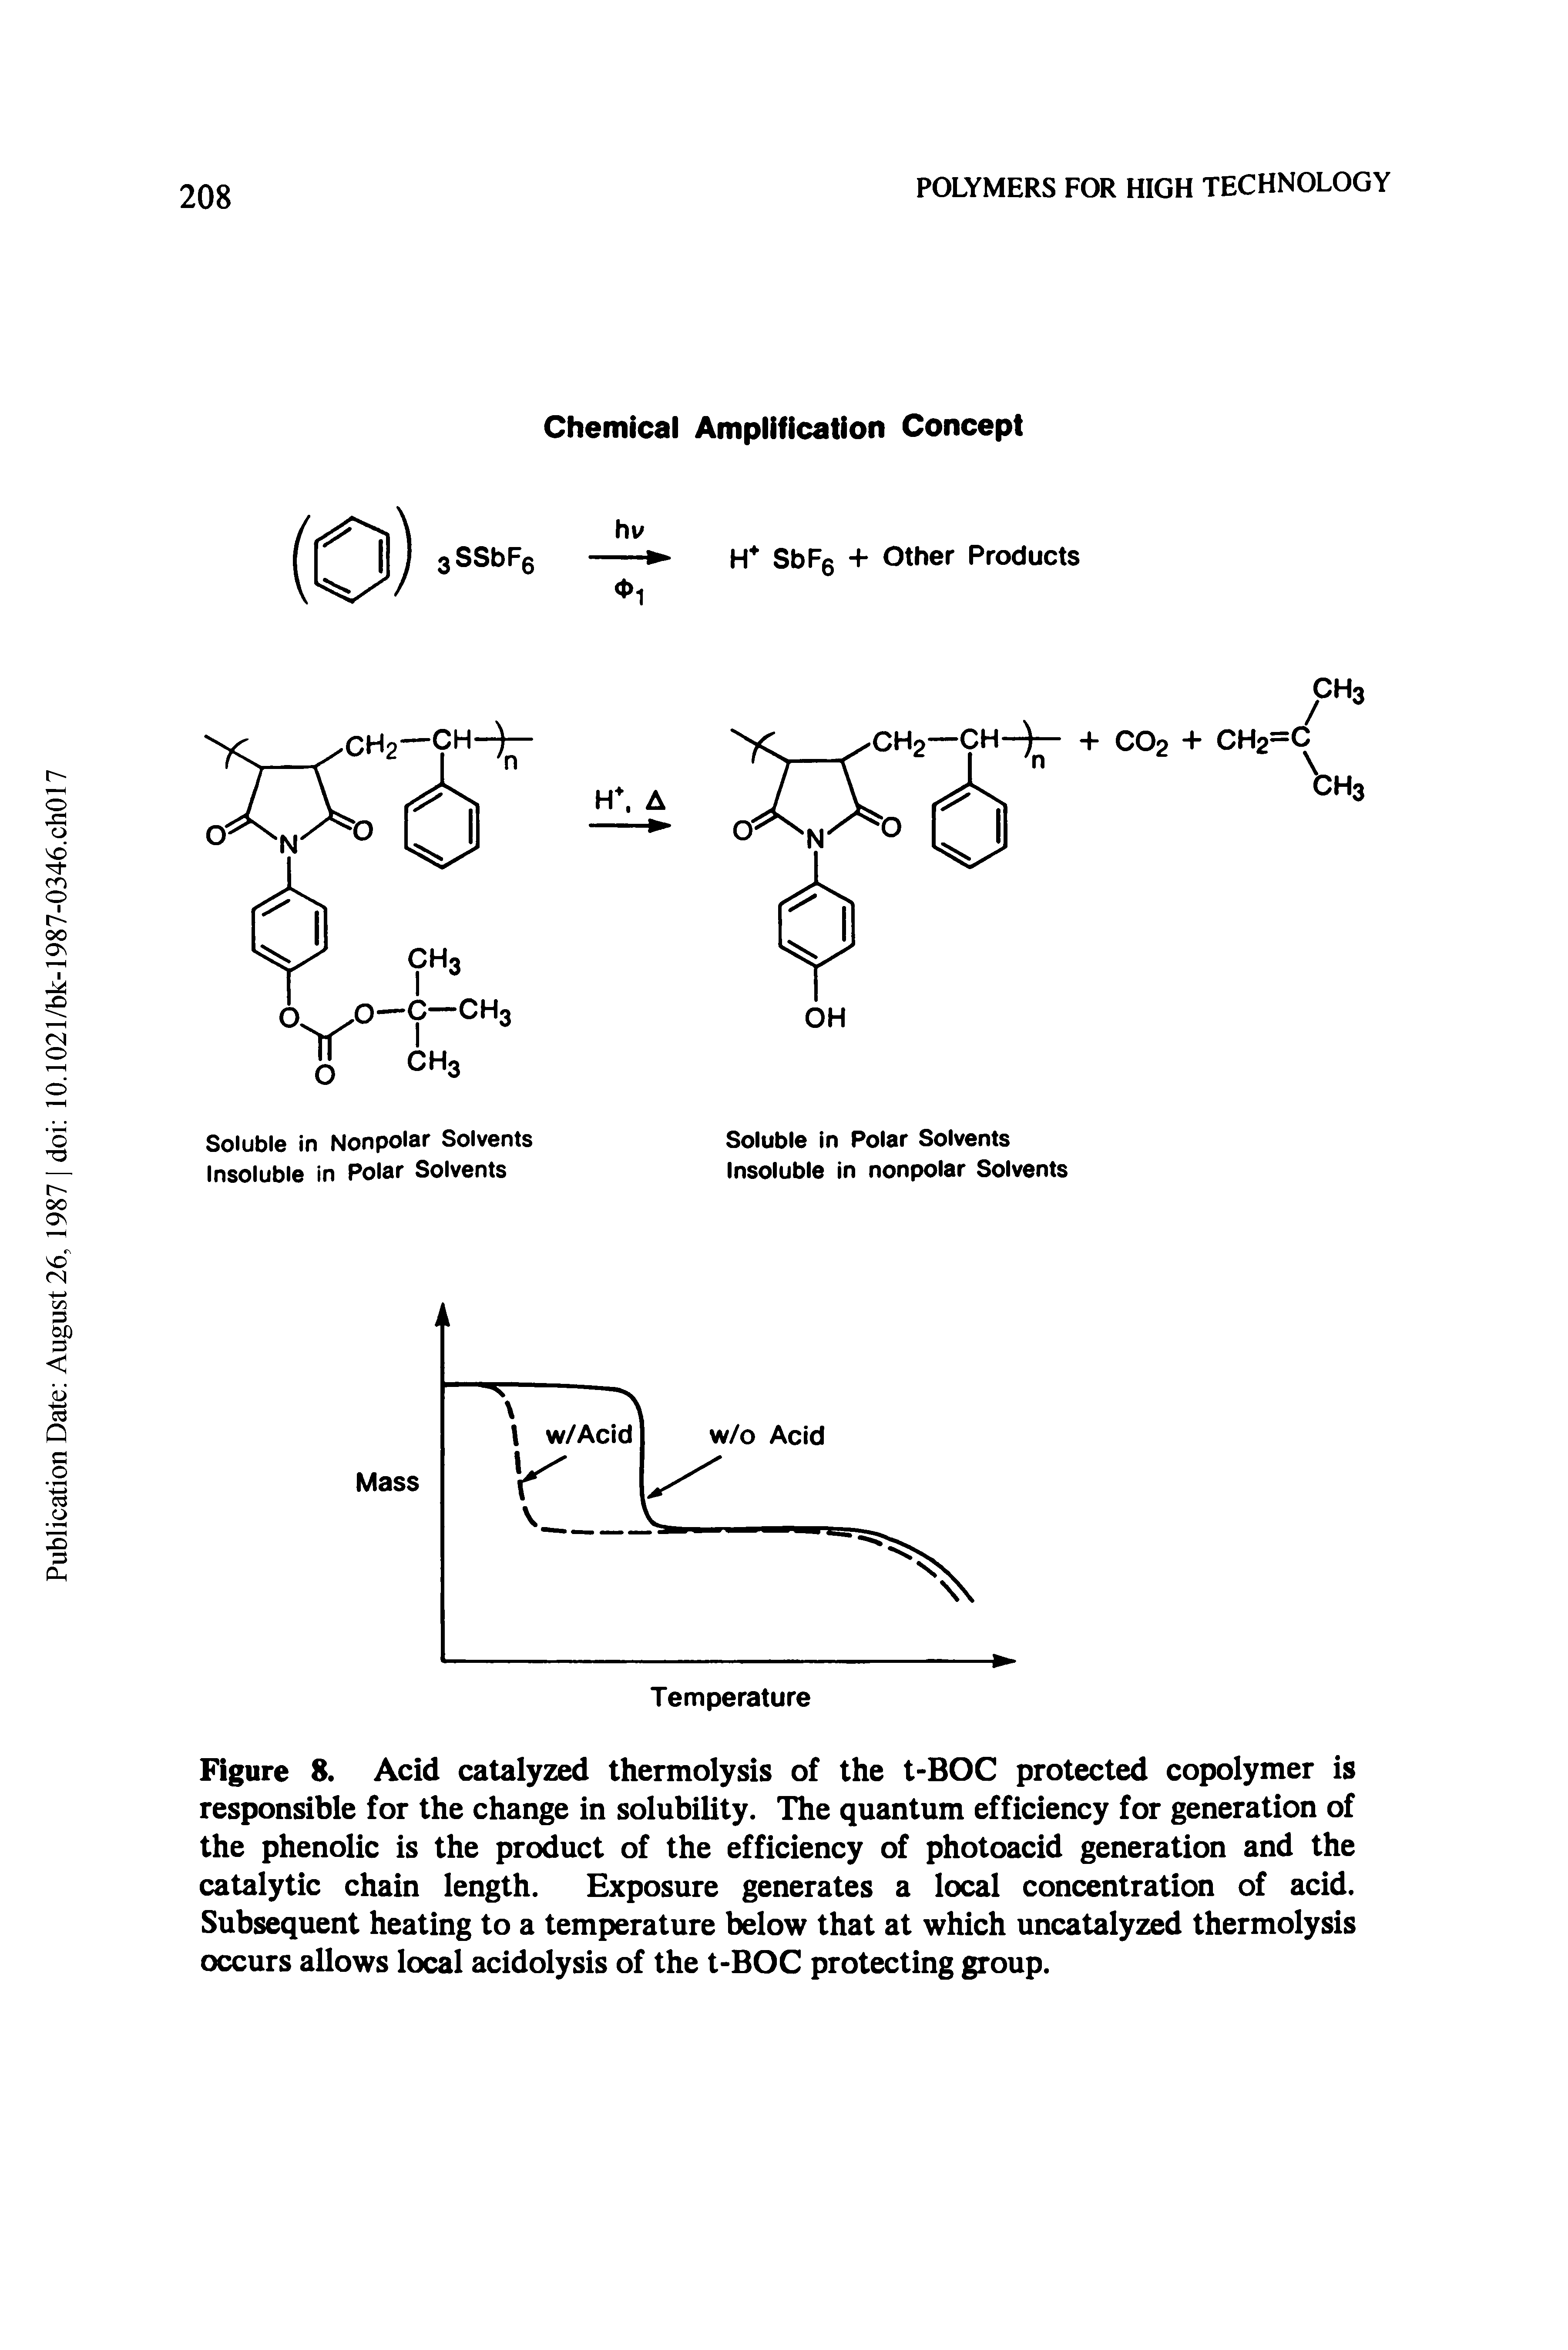 Figure 8. Acid catalyzed thermolysis of the t-BOC protected copolymer is responsible for the change in solubility. The quantum efficiency for generation of the phenolic is the product of the efficiency of photoacid generation and the catalytic chain length. Exposure generates a local concentration of acid. Subsequent heating to a temperature below that at which uncatalyzed thermolysis occurs allows local acidolysis of the t-BOC protecting group.